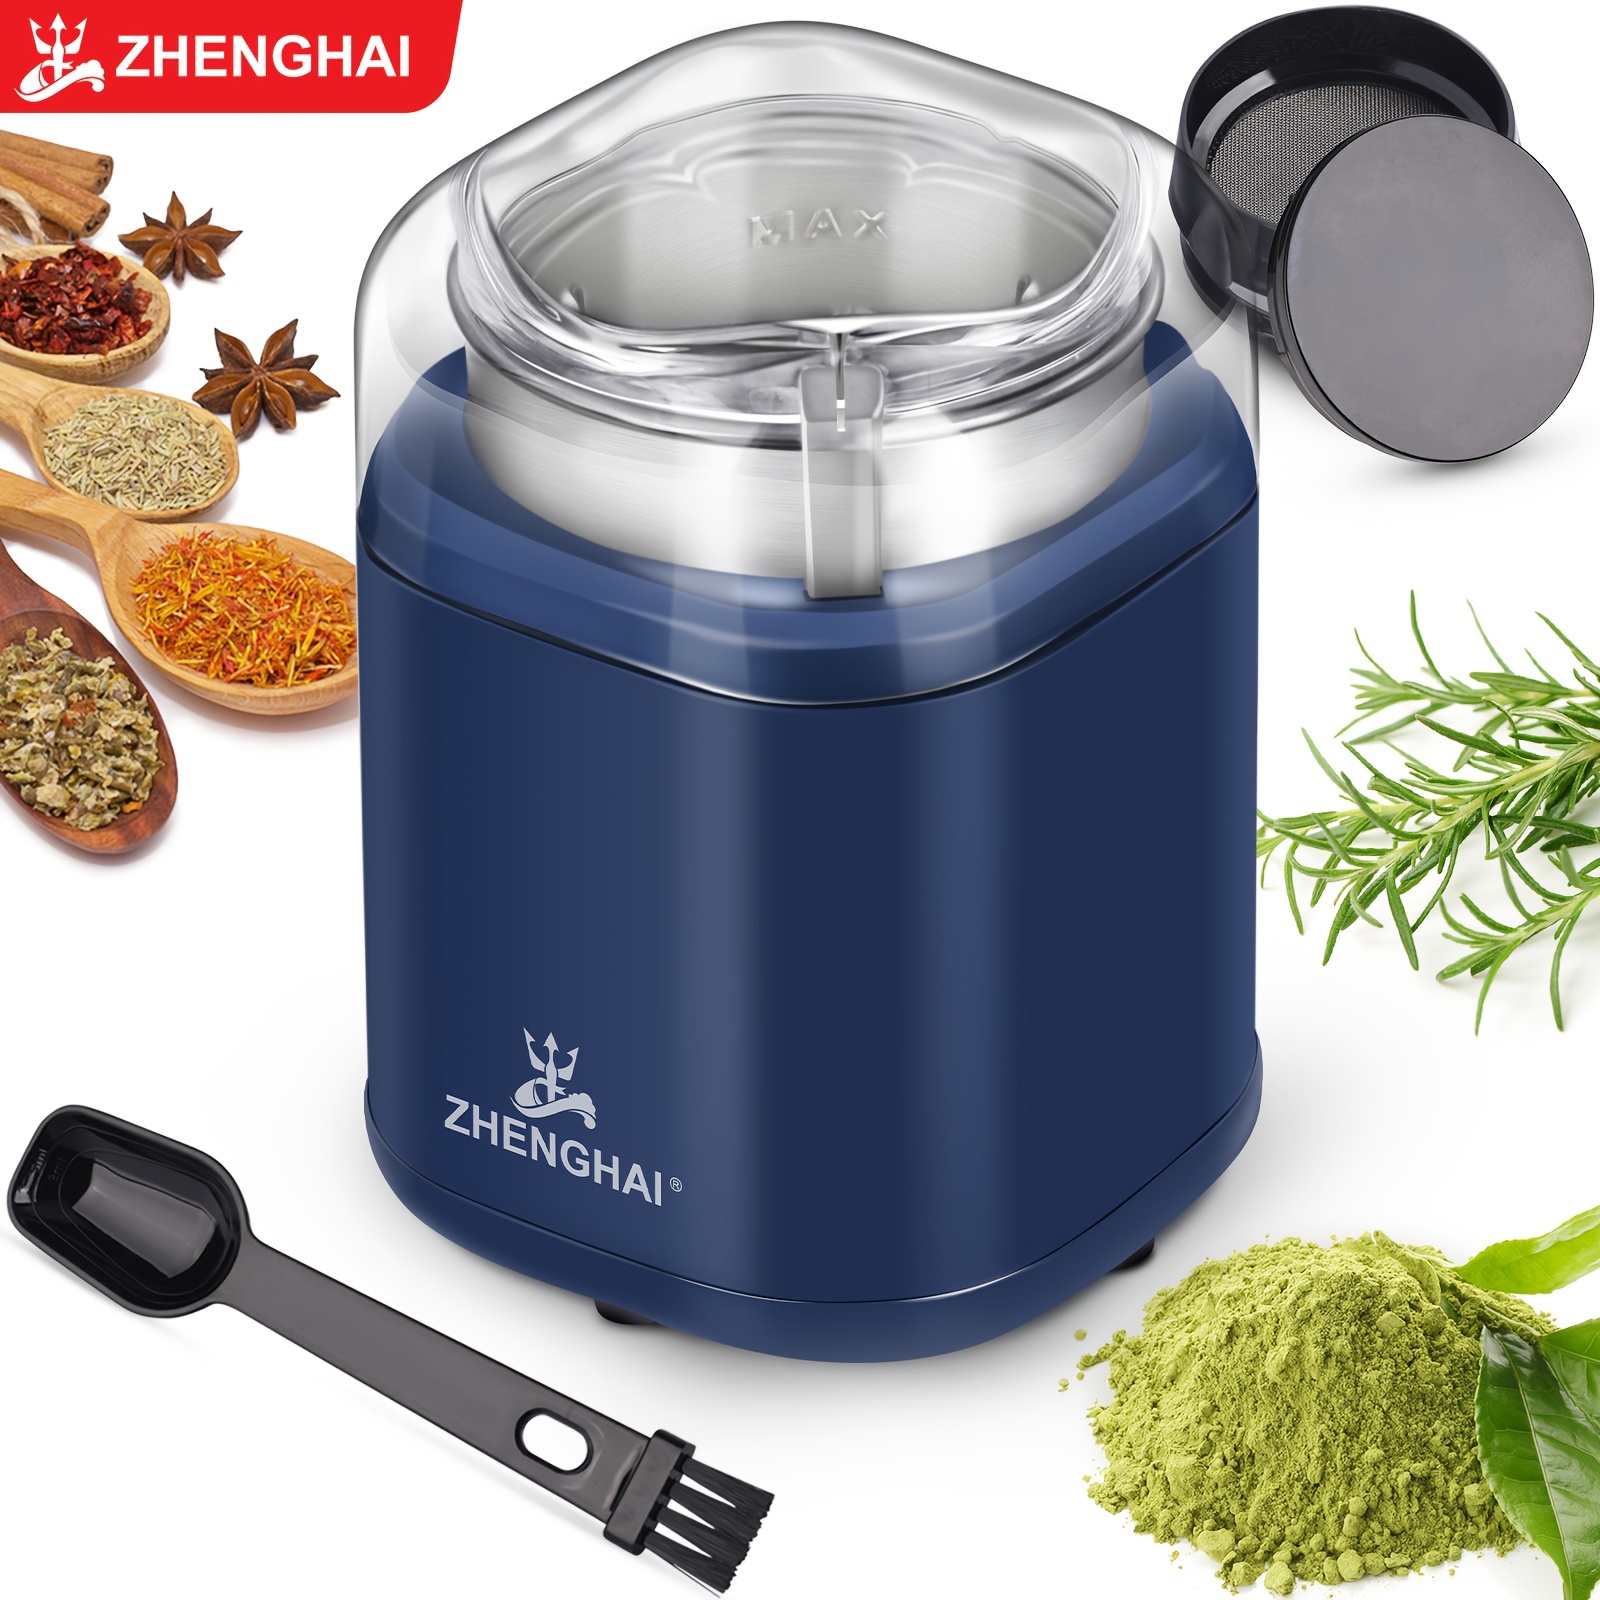 Tiitstoy Coffee Grinder Electric,200W Powerful Spice Grinder, Grinder Herb Grinder Coffee Beans Grinder Electric for Spices,Herbs,Nut with Brush, Size